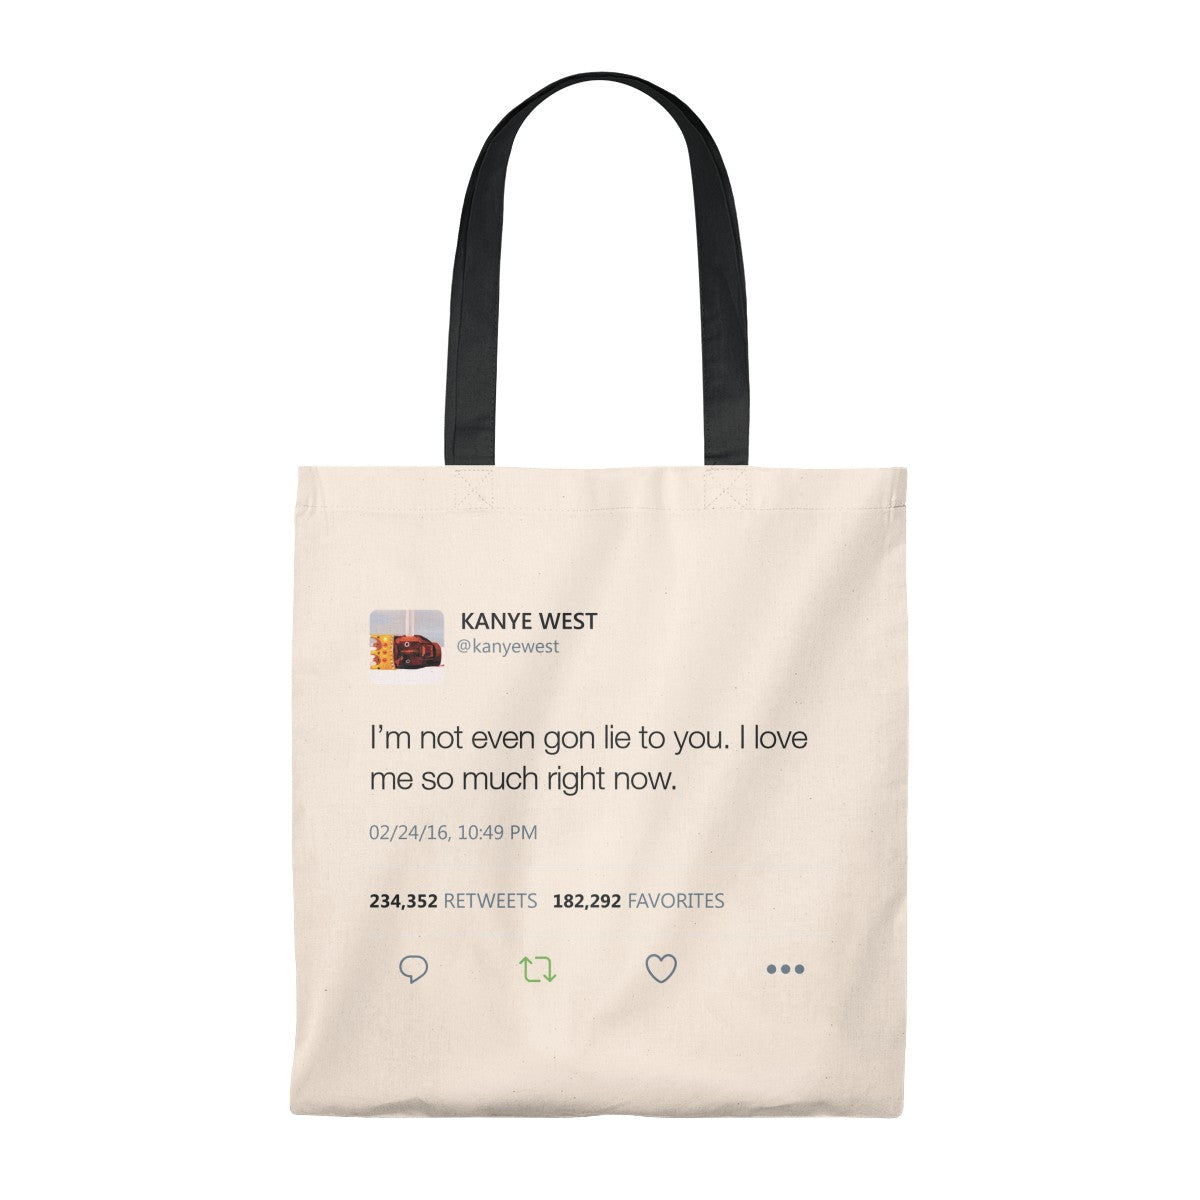 I Love Me So Much Right Now Kanye West Tweet Tote Bag-Natural/Black-Archethype